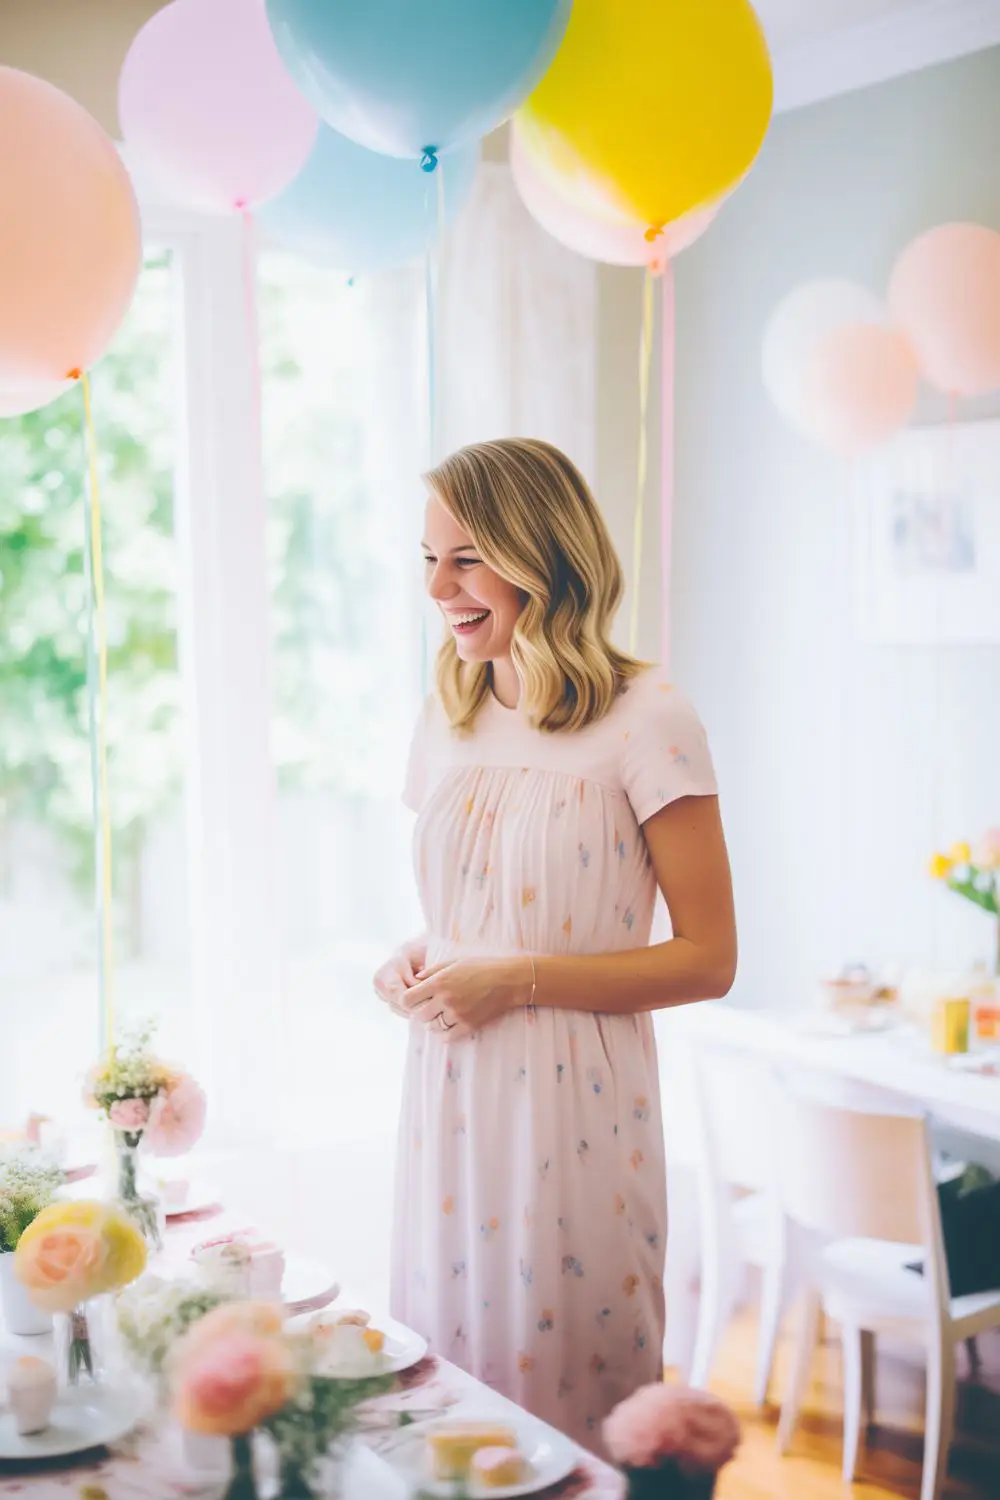 baby shower ideas for small groups, woman at an intimate baby shower